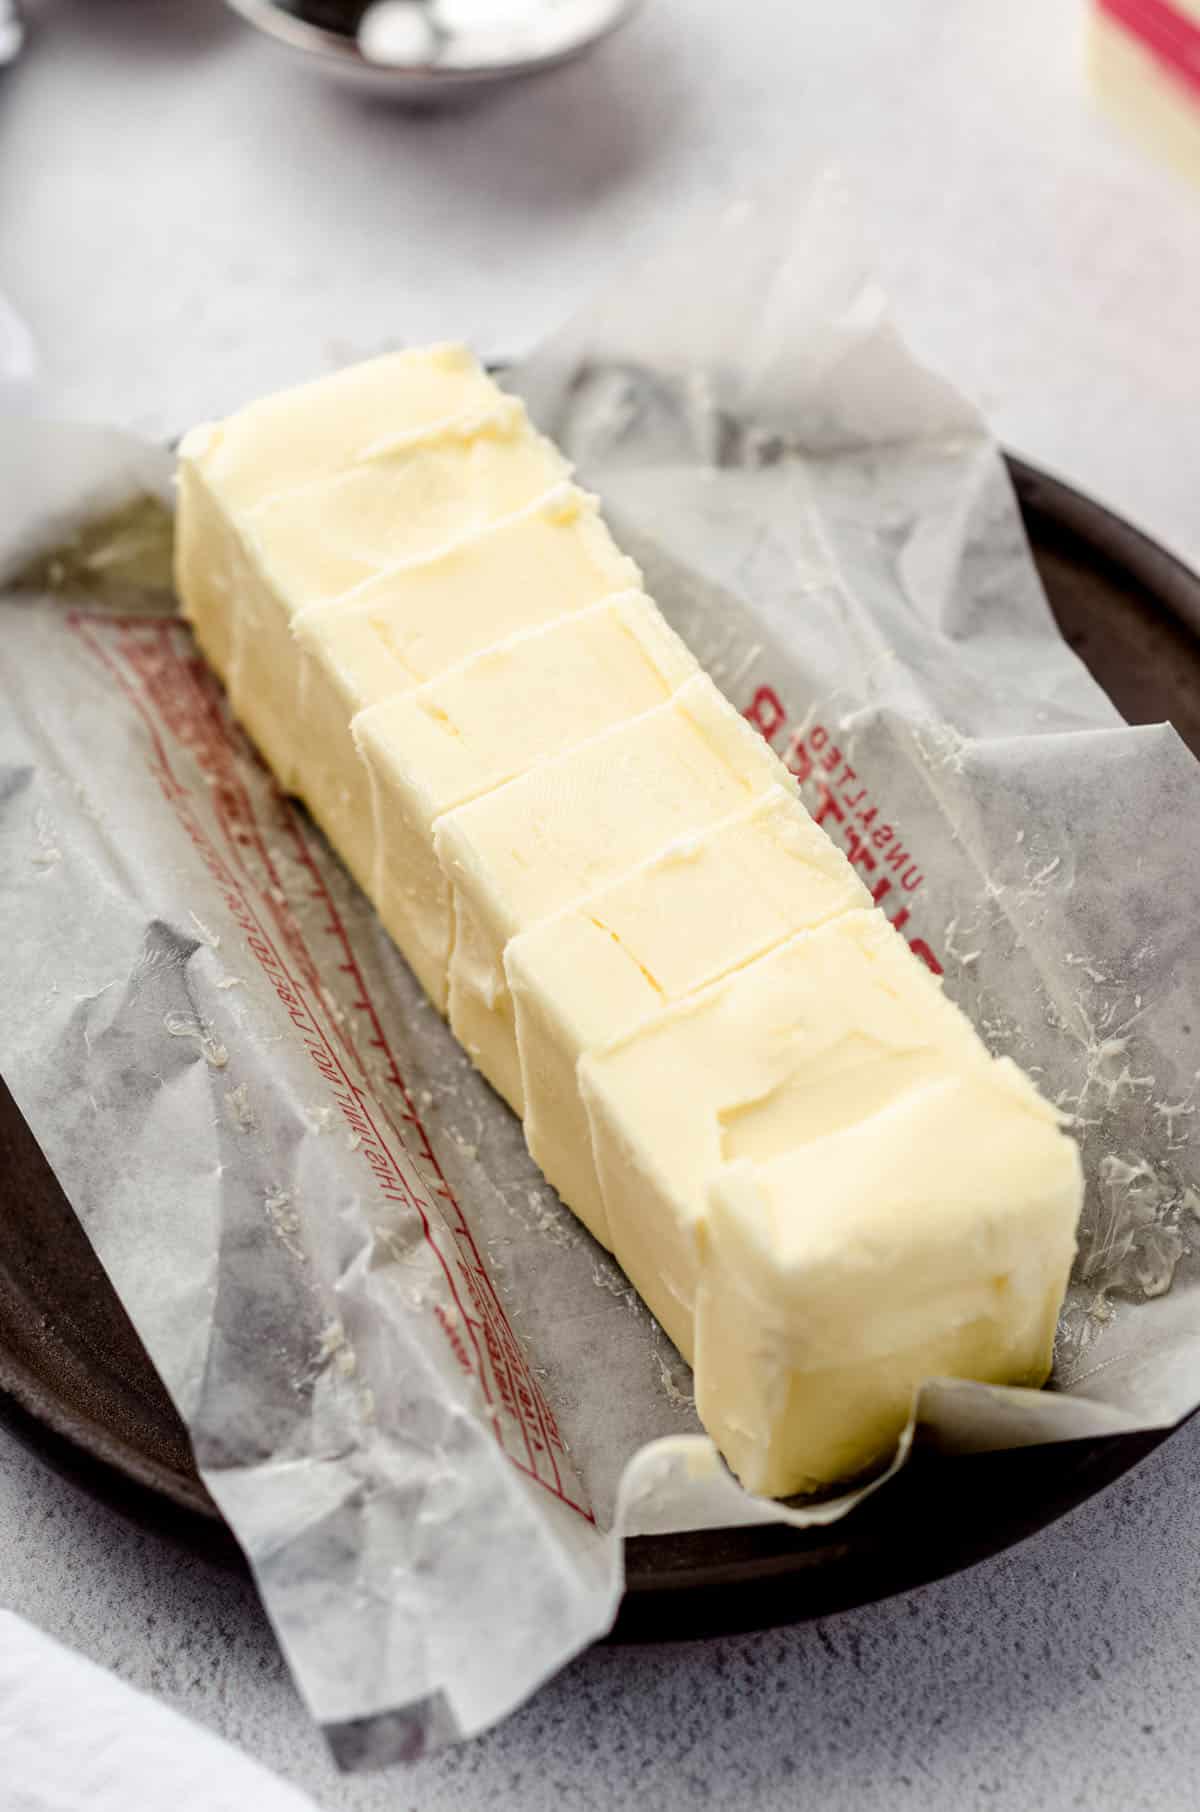 A stick of butter sliced and on its wrapper on a plate.